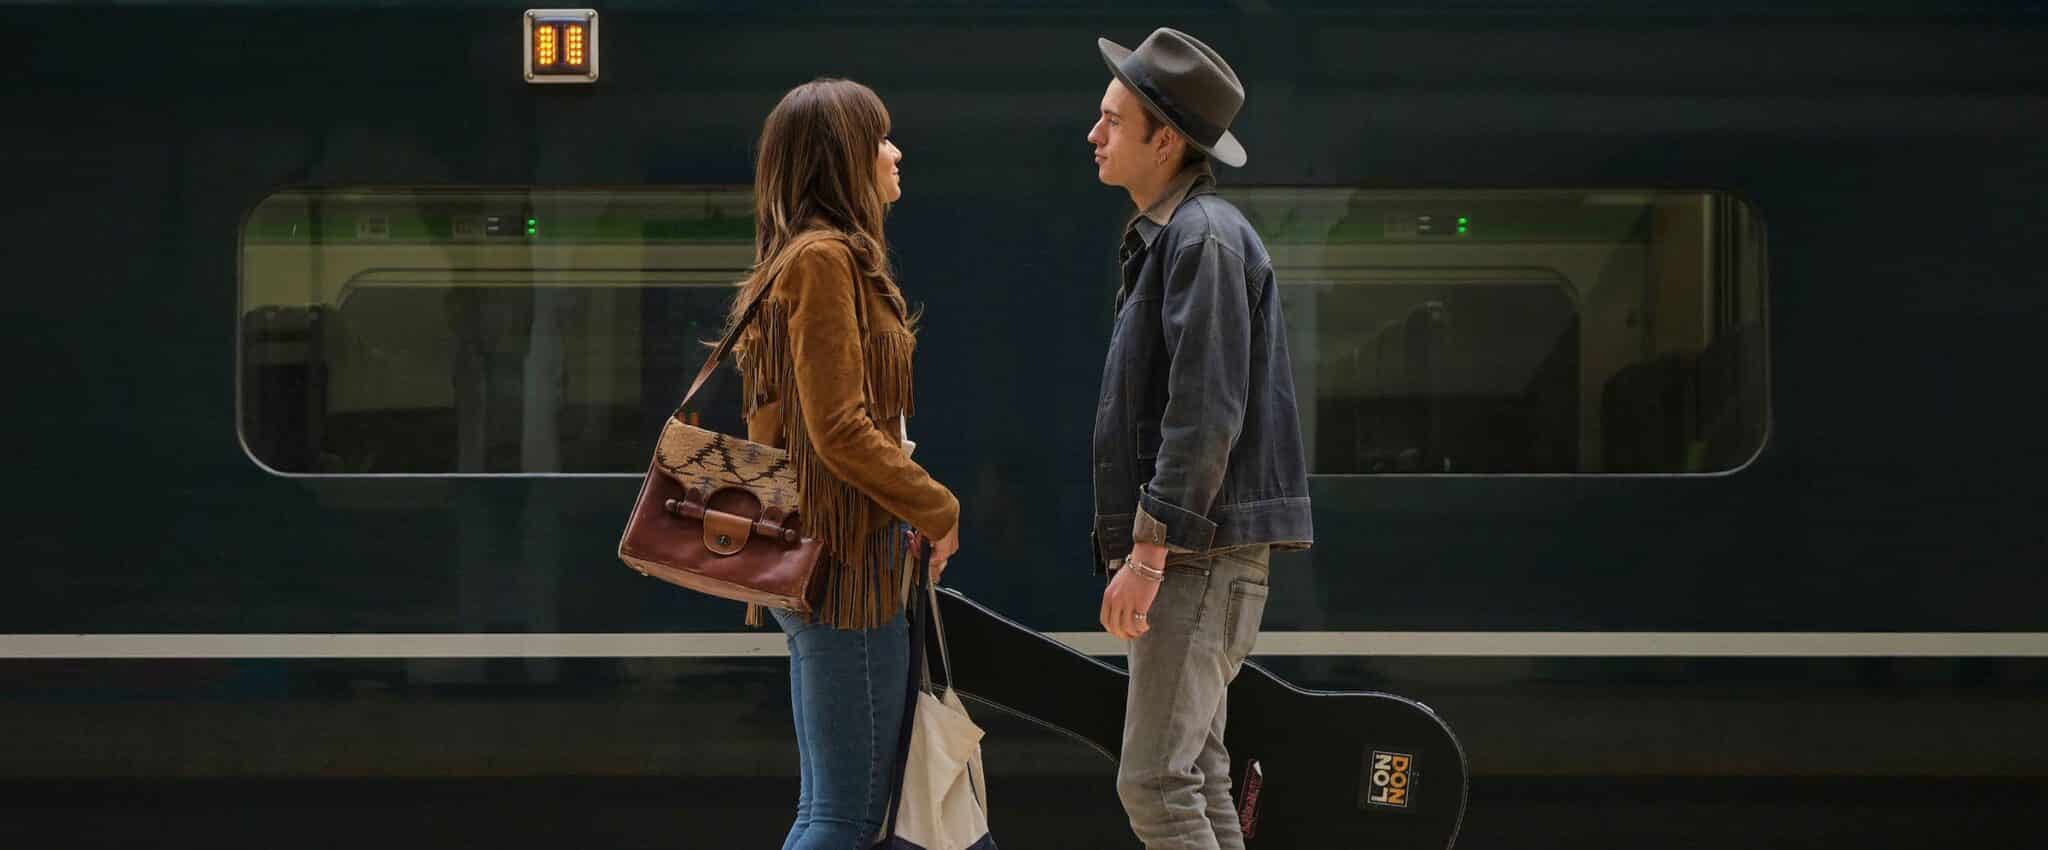 couple look at each other on train platform